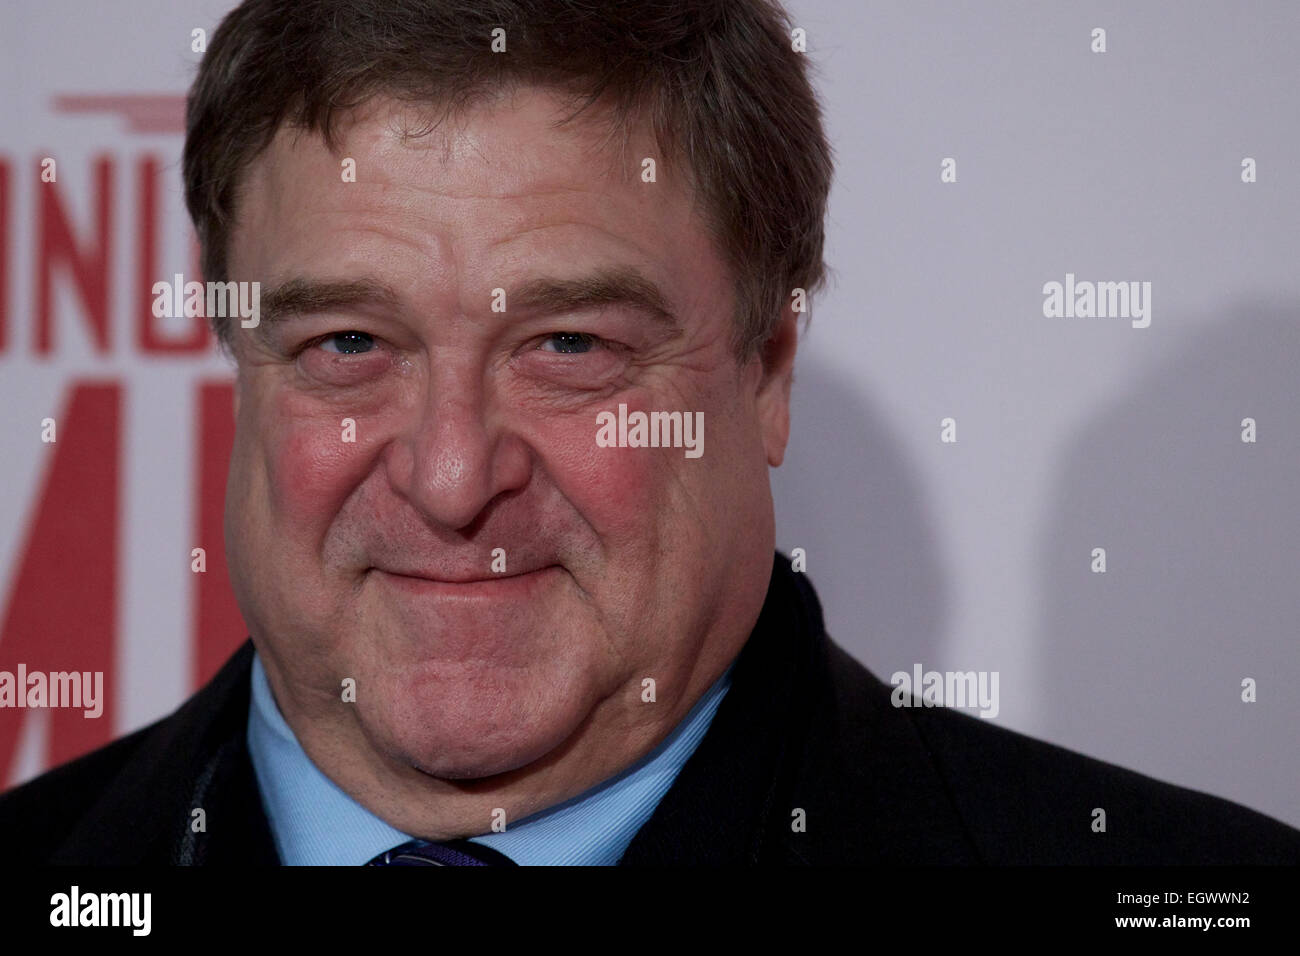 UNITED KINGDOM, London : American actor John Goodman poses for a photo call in front of 'Cupid complaining to Venus' by Lucas Cranach which was a painting that belonged in Hitlers private collection, in conjunction with the film 'The Monument men' in central London on February 11, 2014 Stock Photo